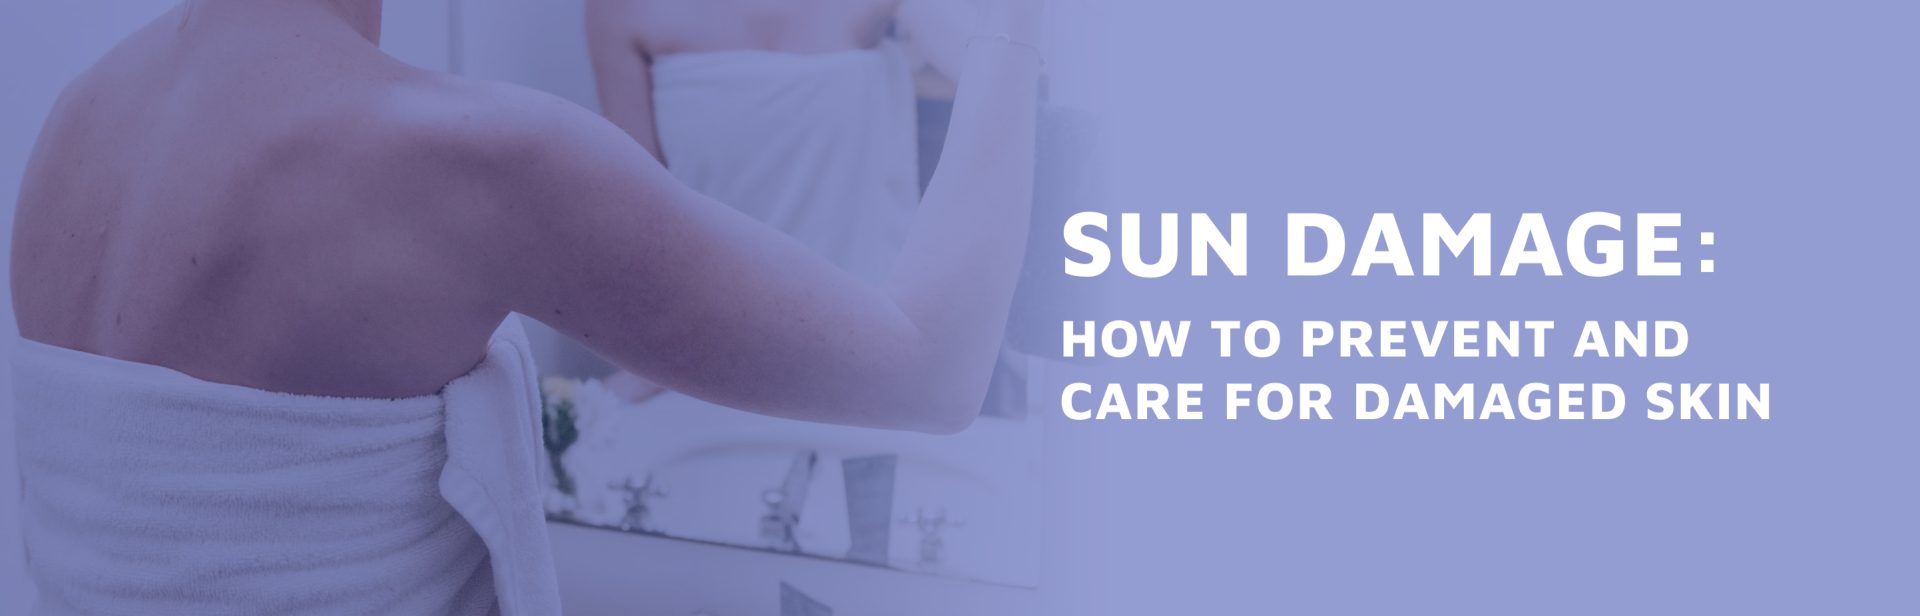 Sun-Damage--How-to-Prevent-and-Care-For-Damaged-Skin